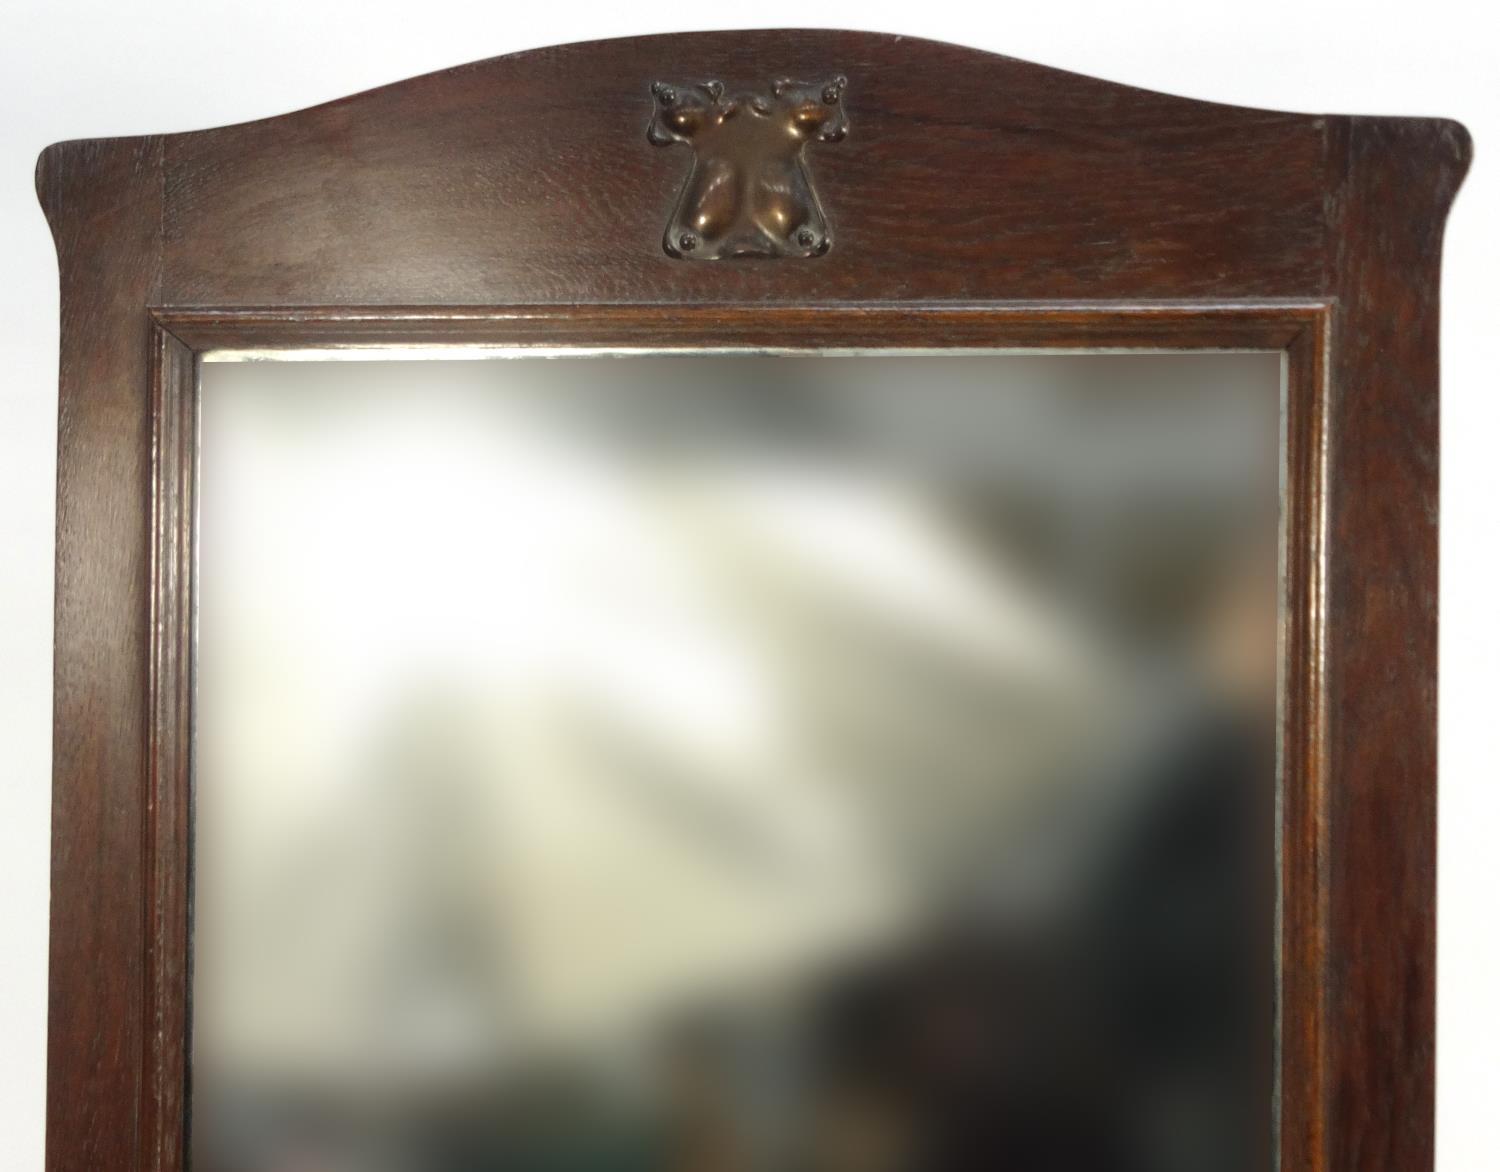 Arts and crafts oak hall mirror with brass plaque and cupboard base, 180cm high x 61cm wide x 43cm - Image 5 of 5